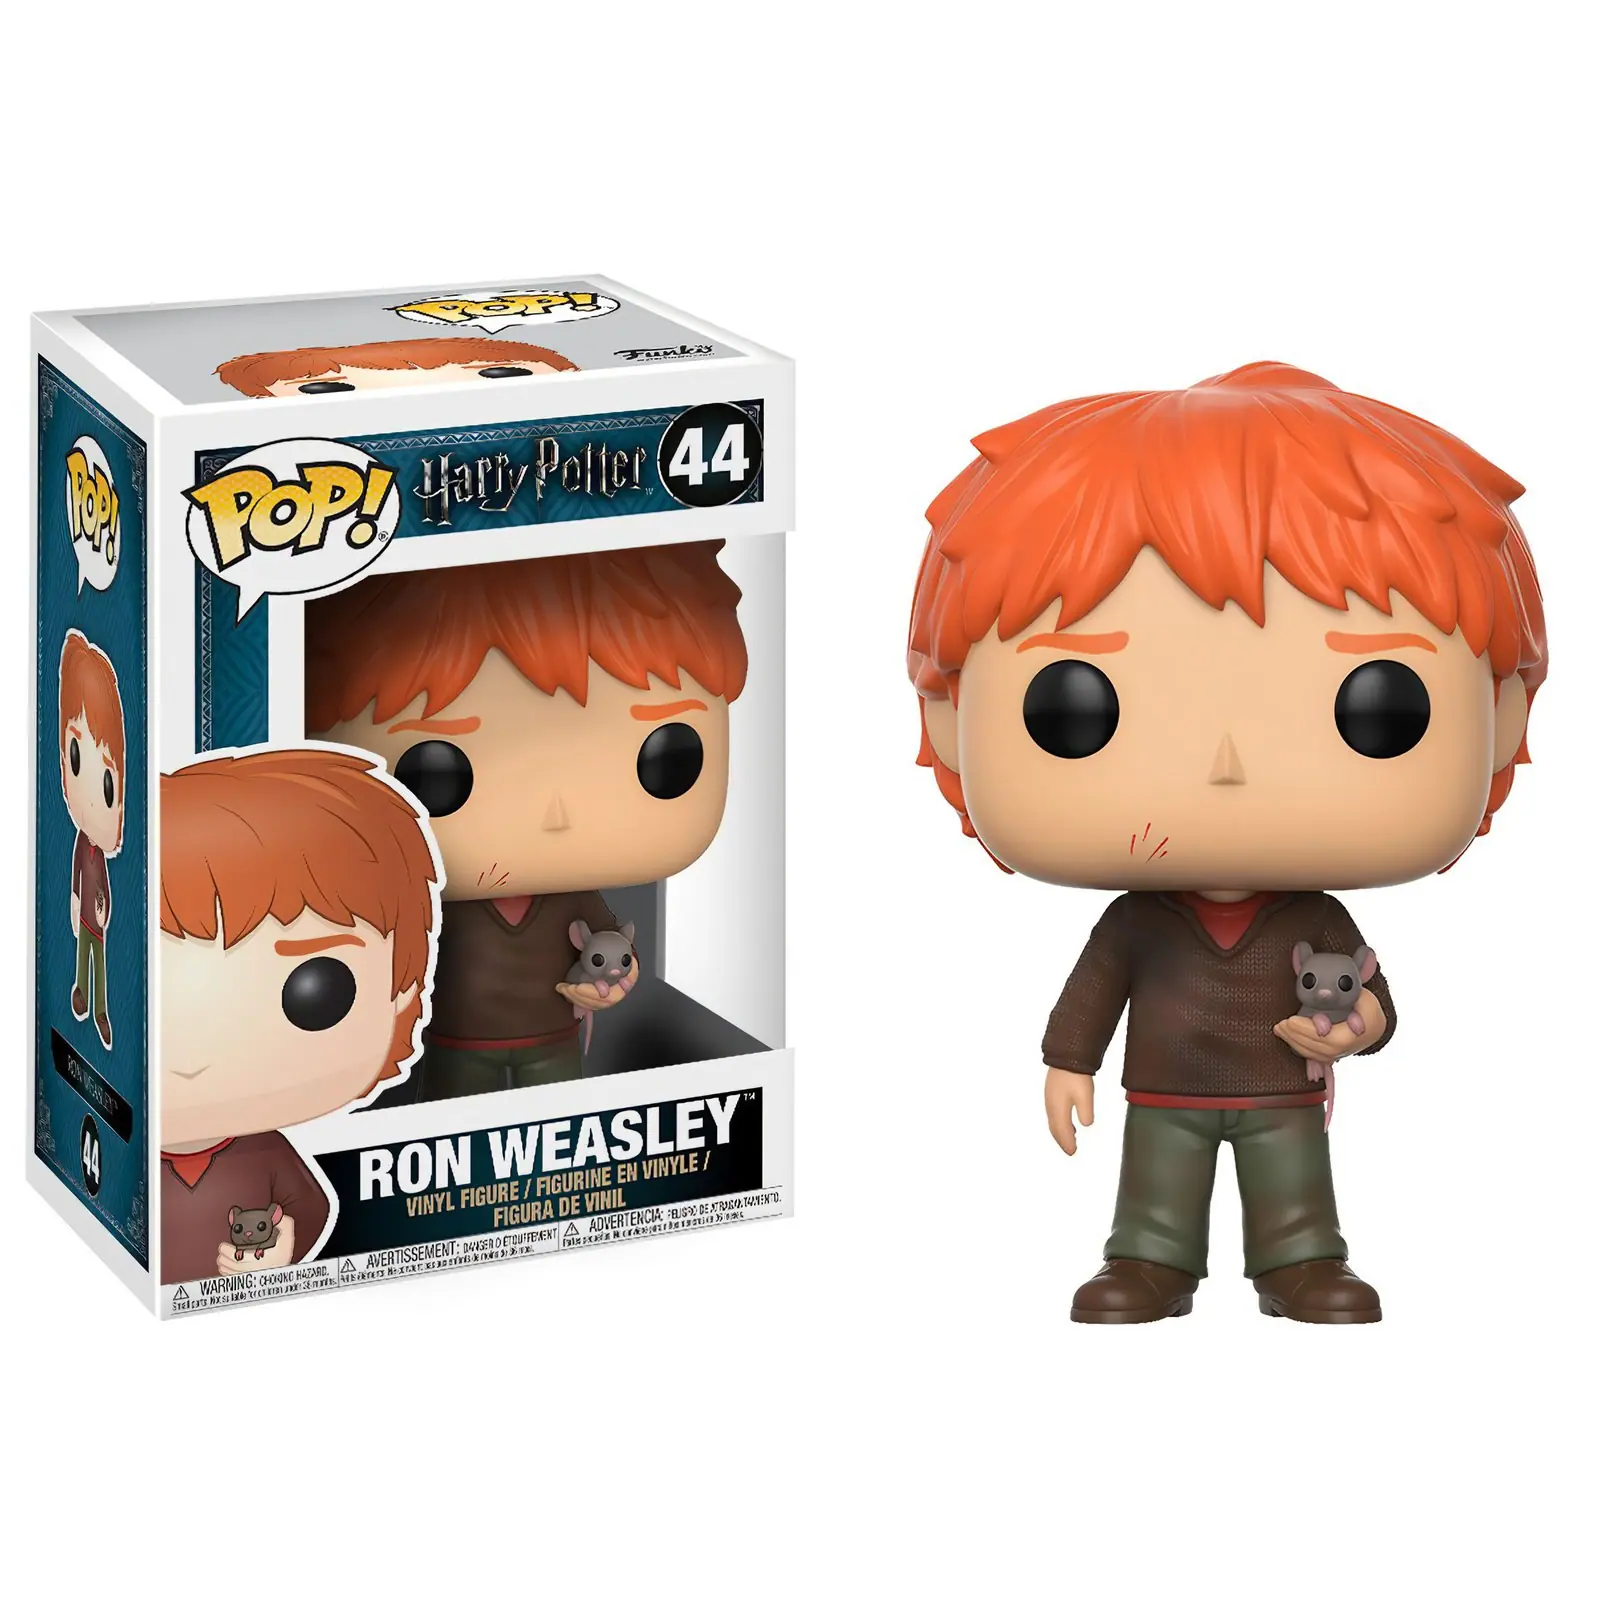 Funko PoP Harry Potter 44 Ron Weasley with Scabbers